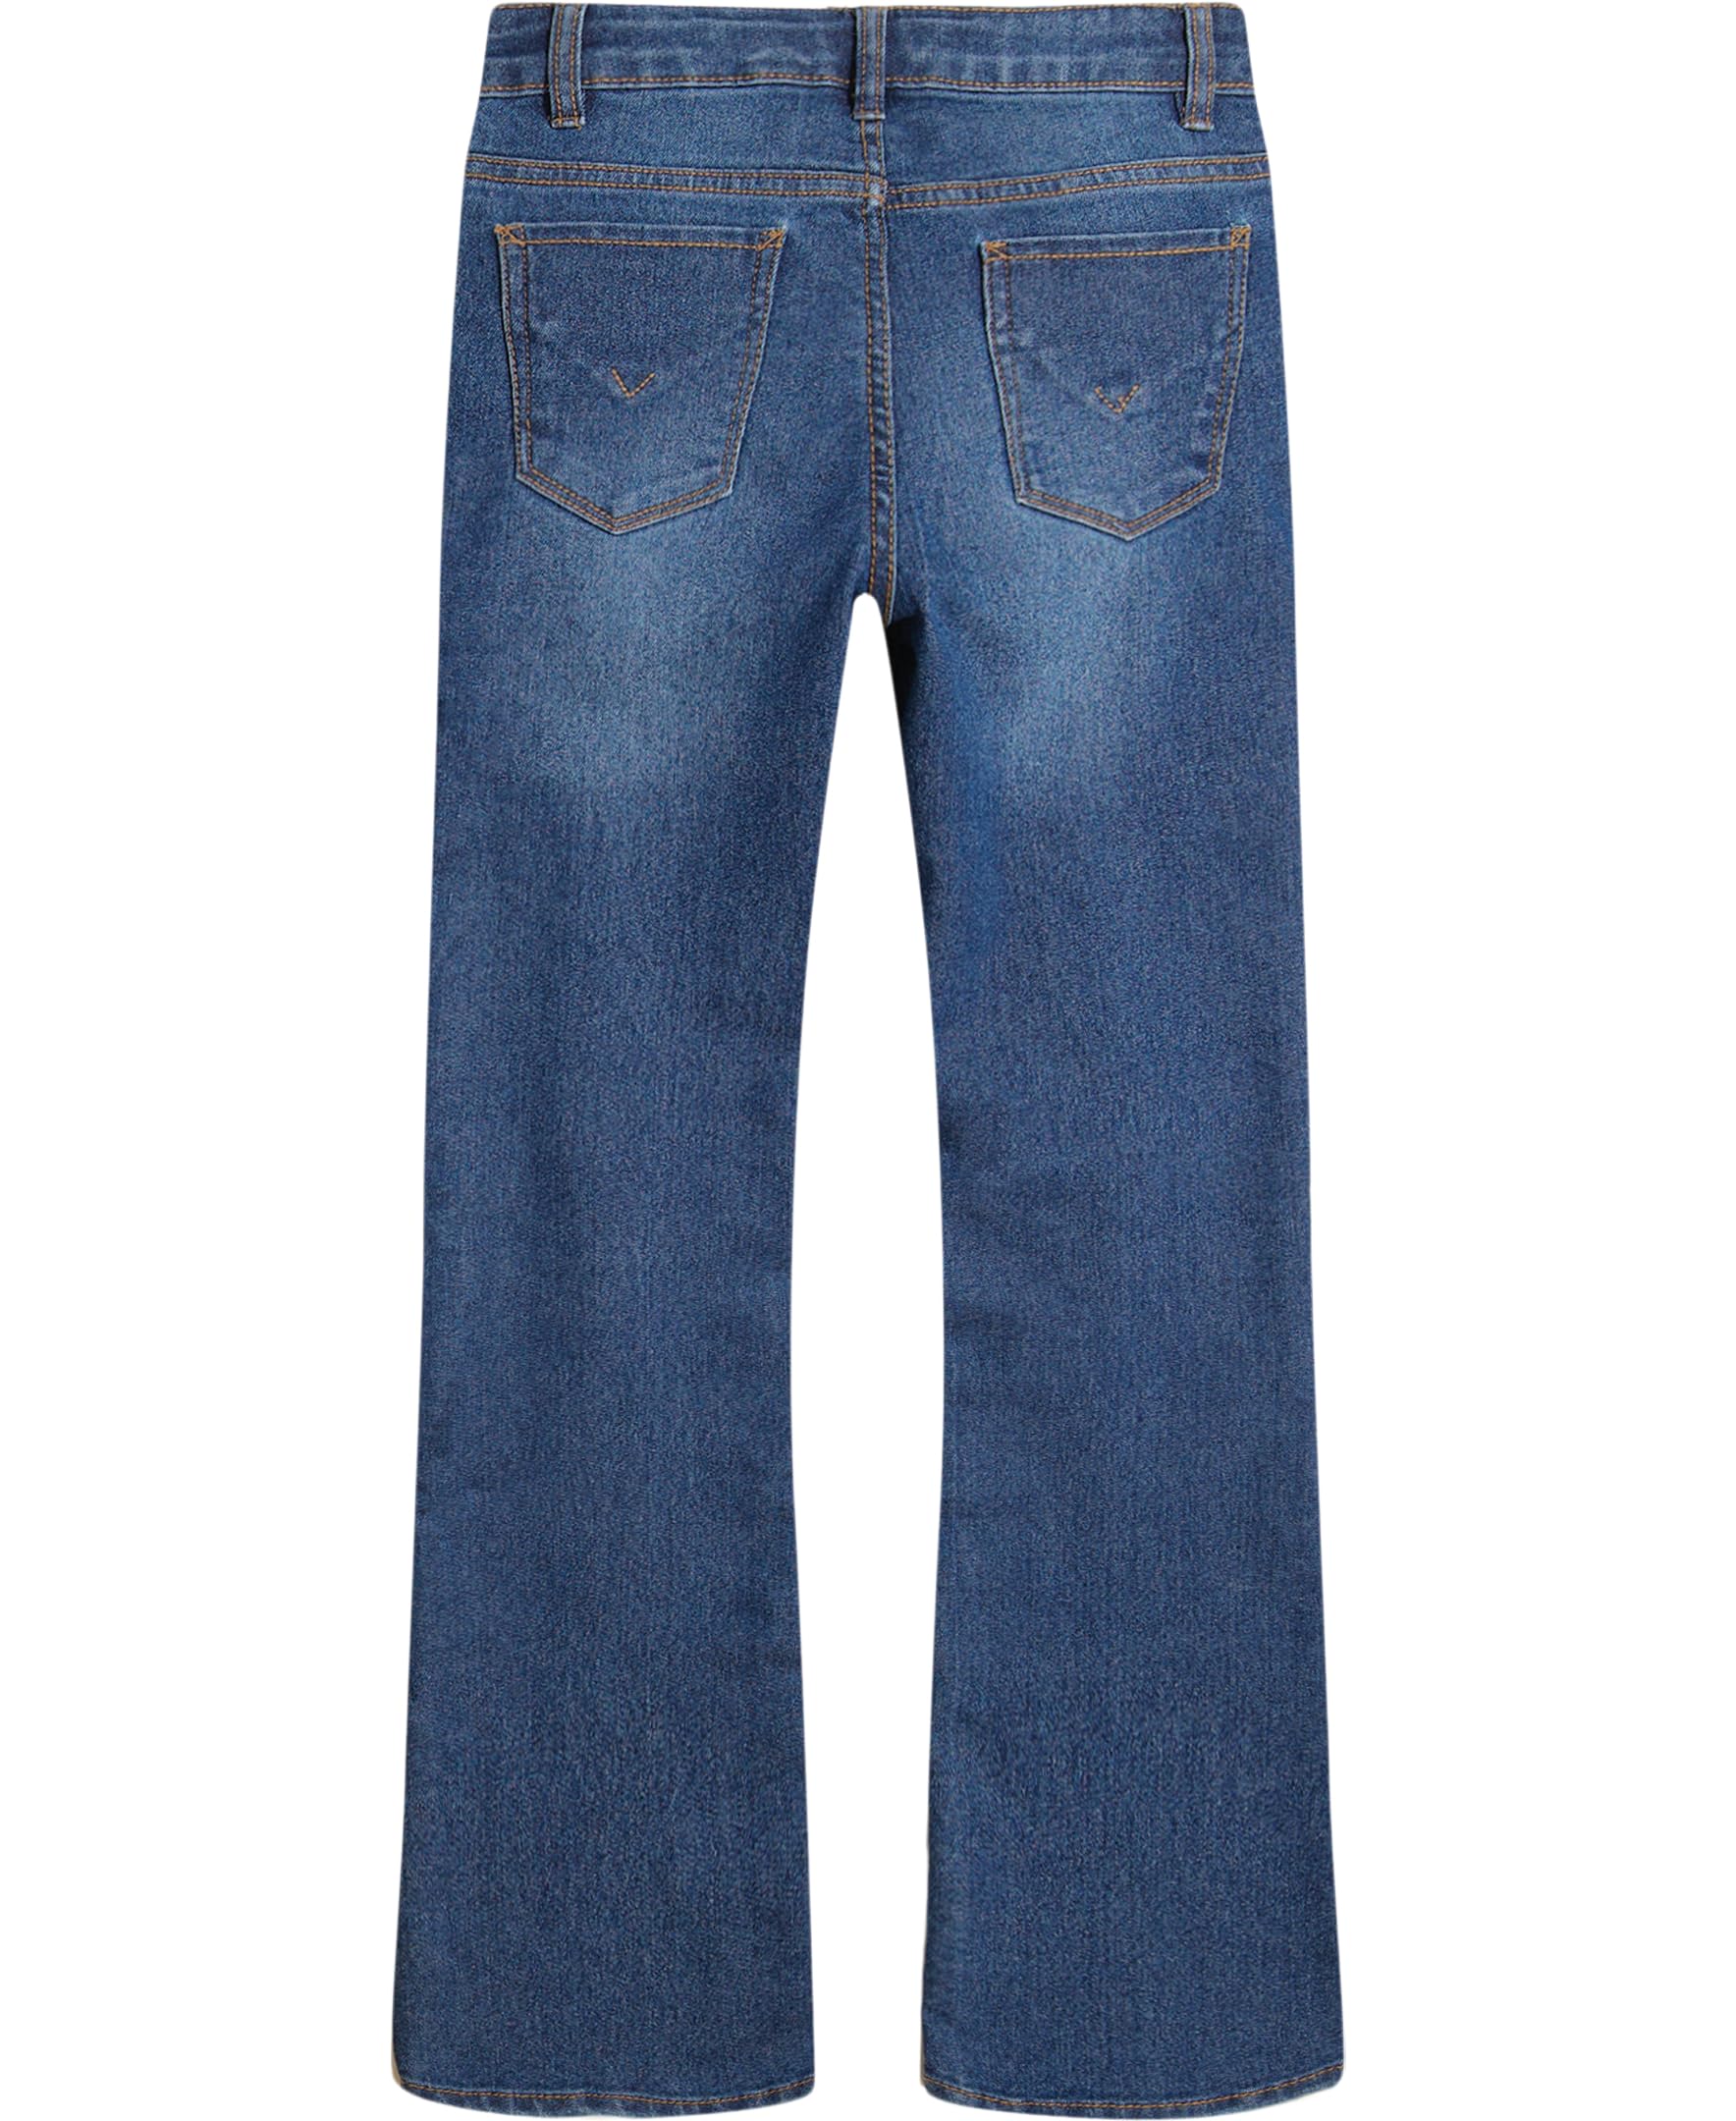 HUDSON Girls' Stretch Denim Jeans, Bell-Bottom Style Pants with Flared Legs